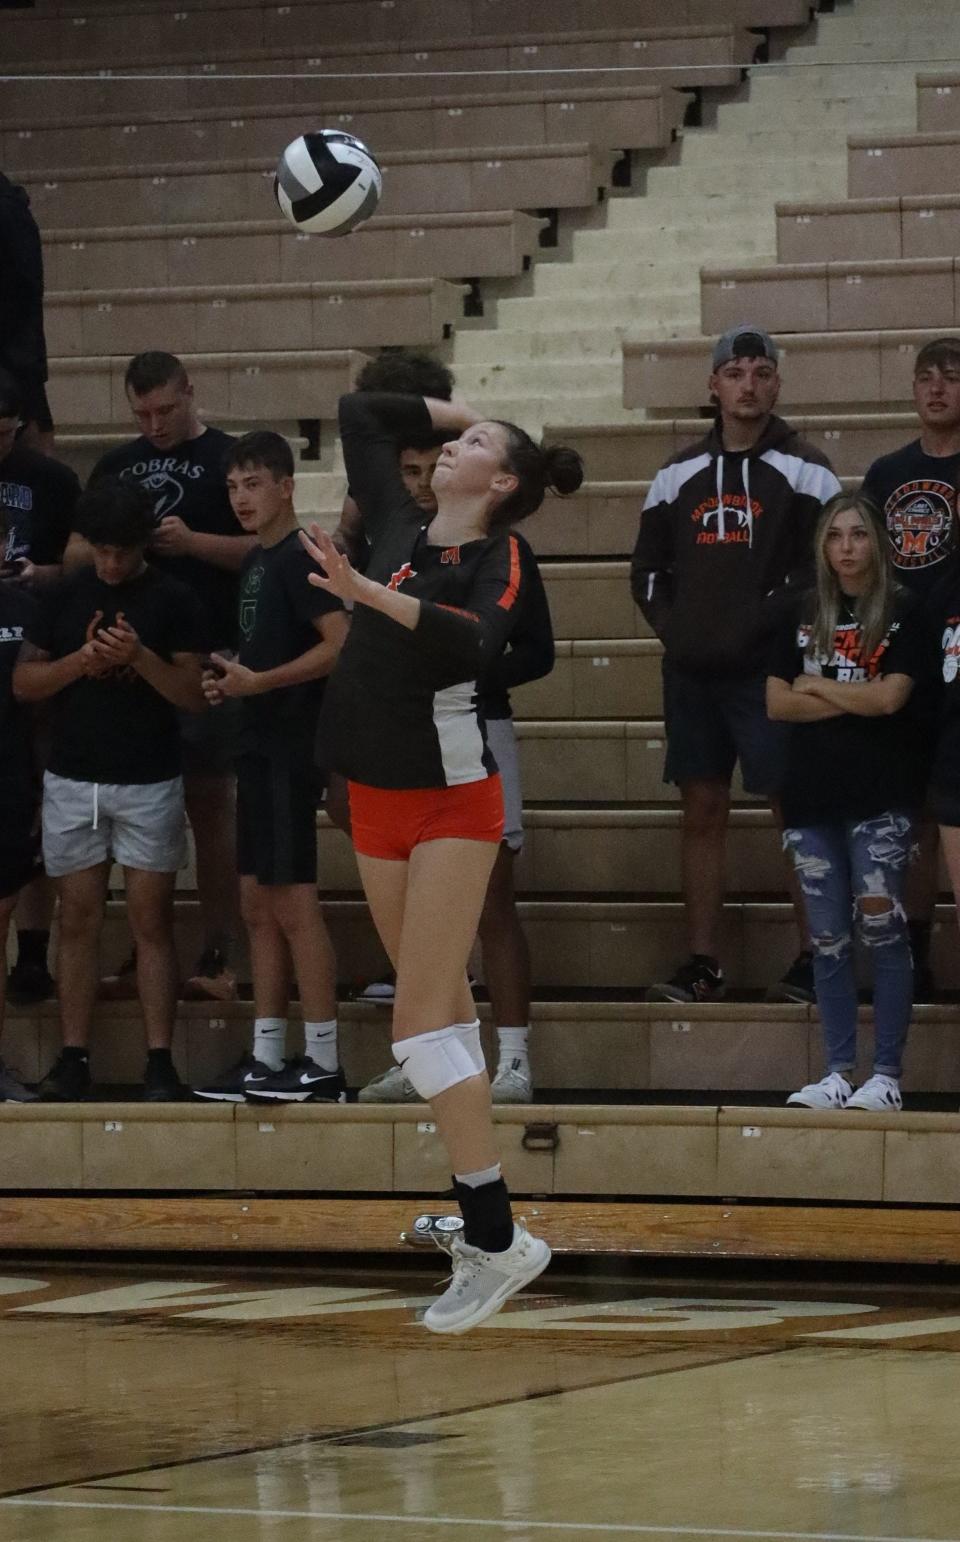 Meadowbrook senior Taylor Sichina (1) prepares to serve during Saturday's season opening match with Heath at Meadowbrook High School.